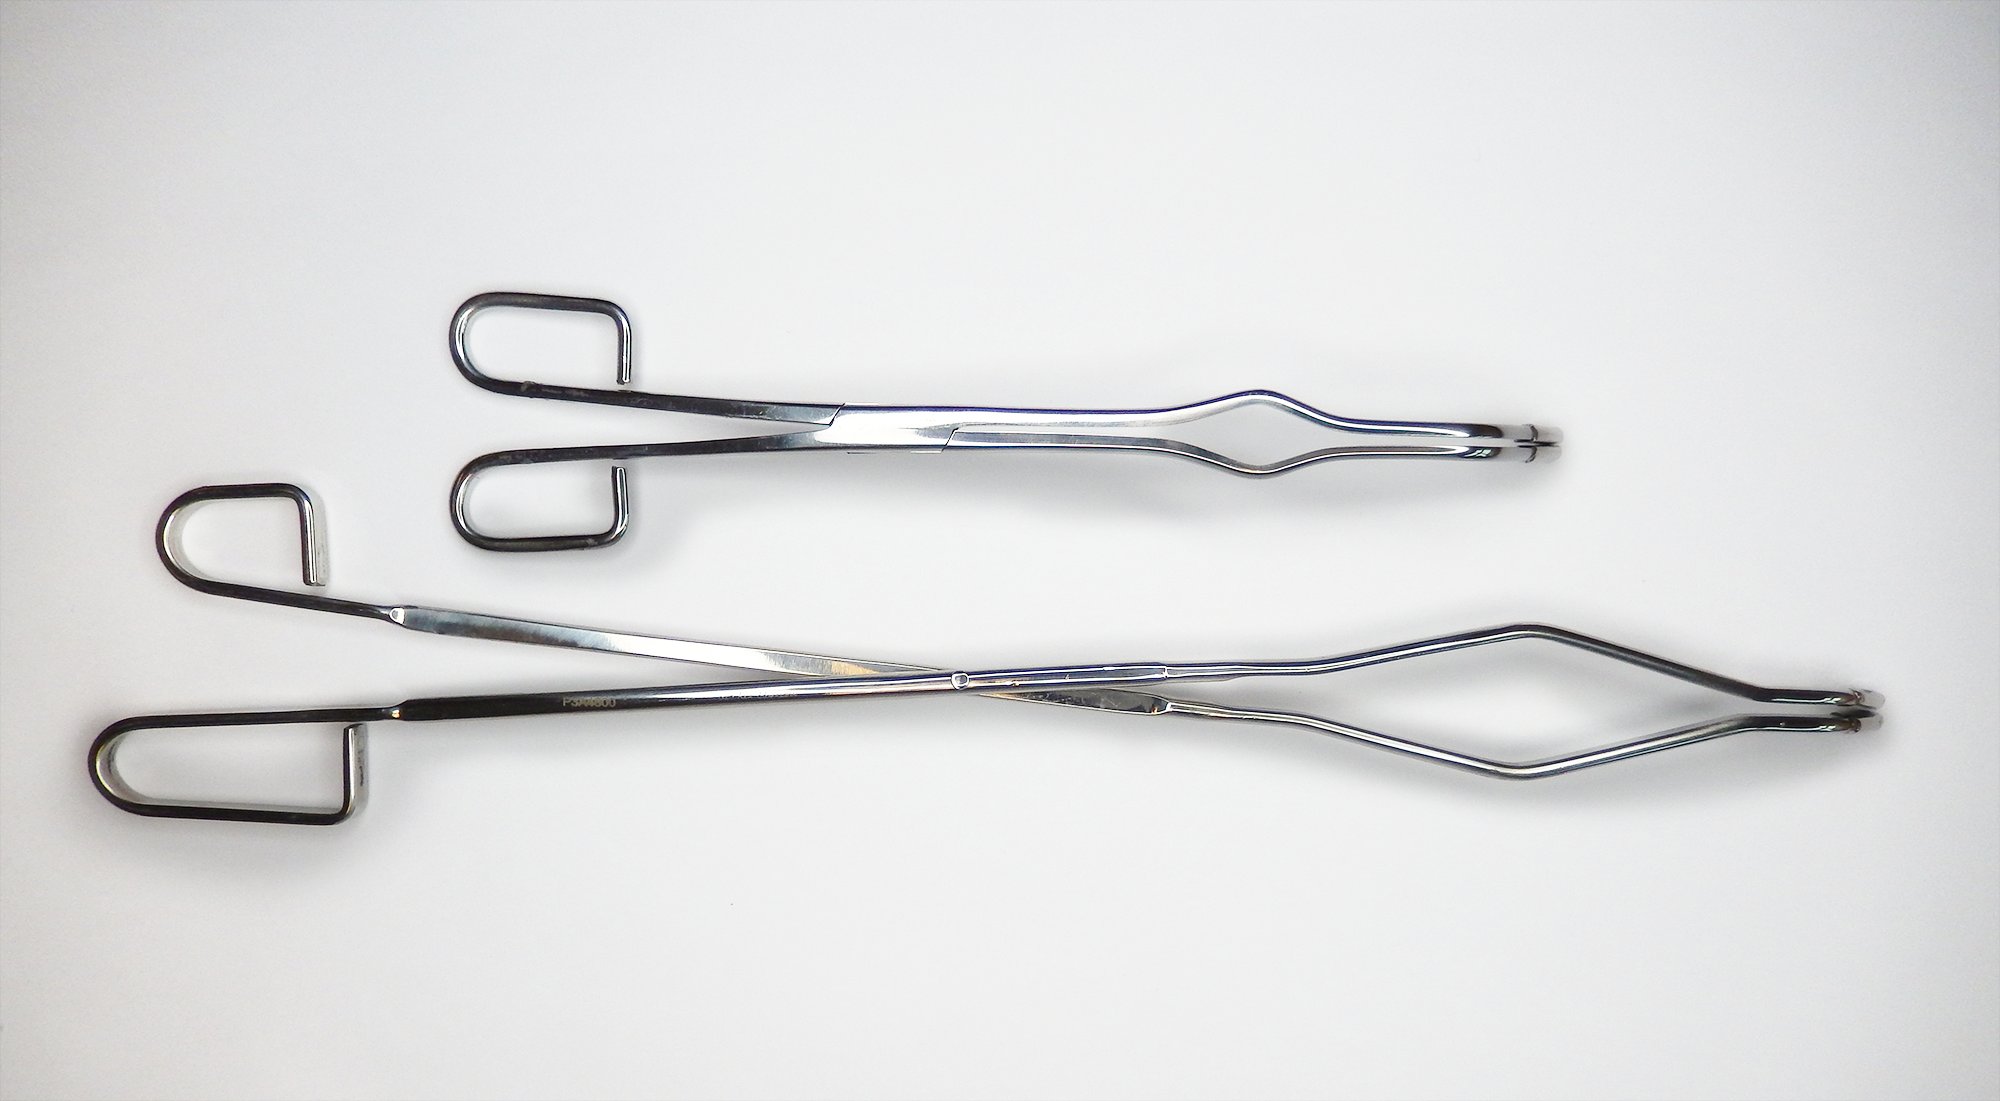 lab use stainless crucible tongs